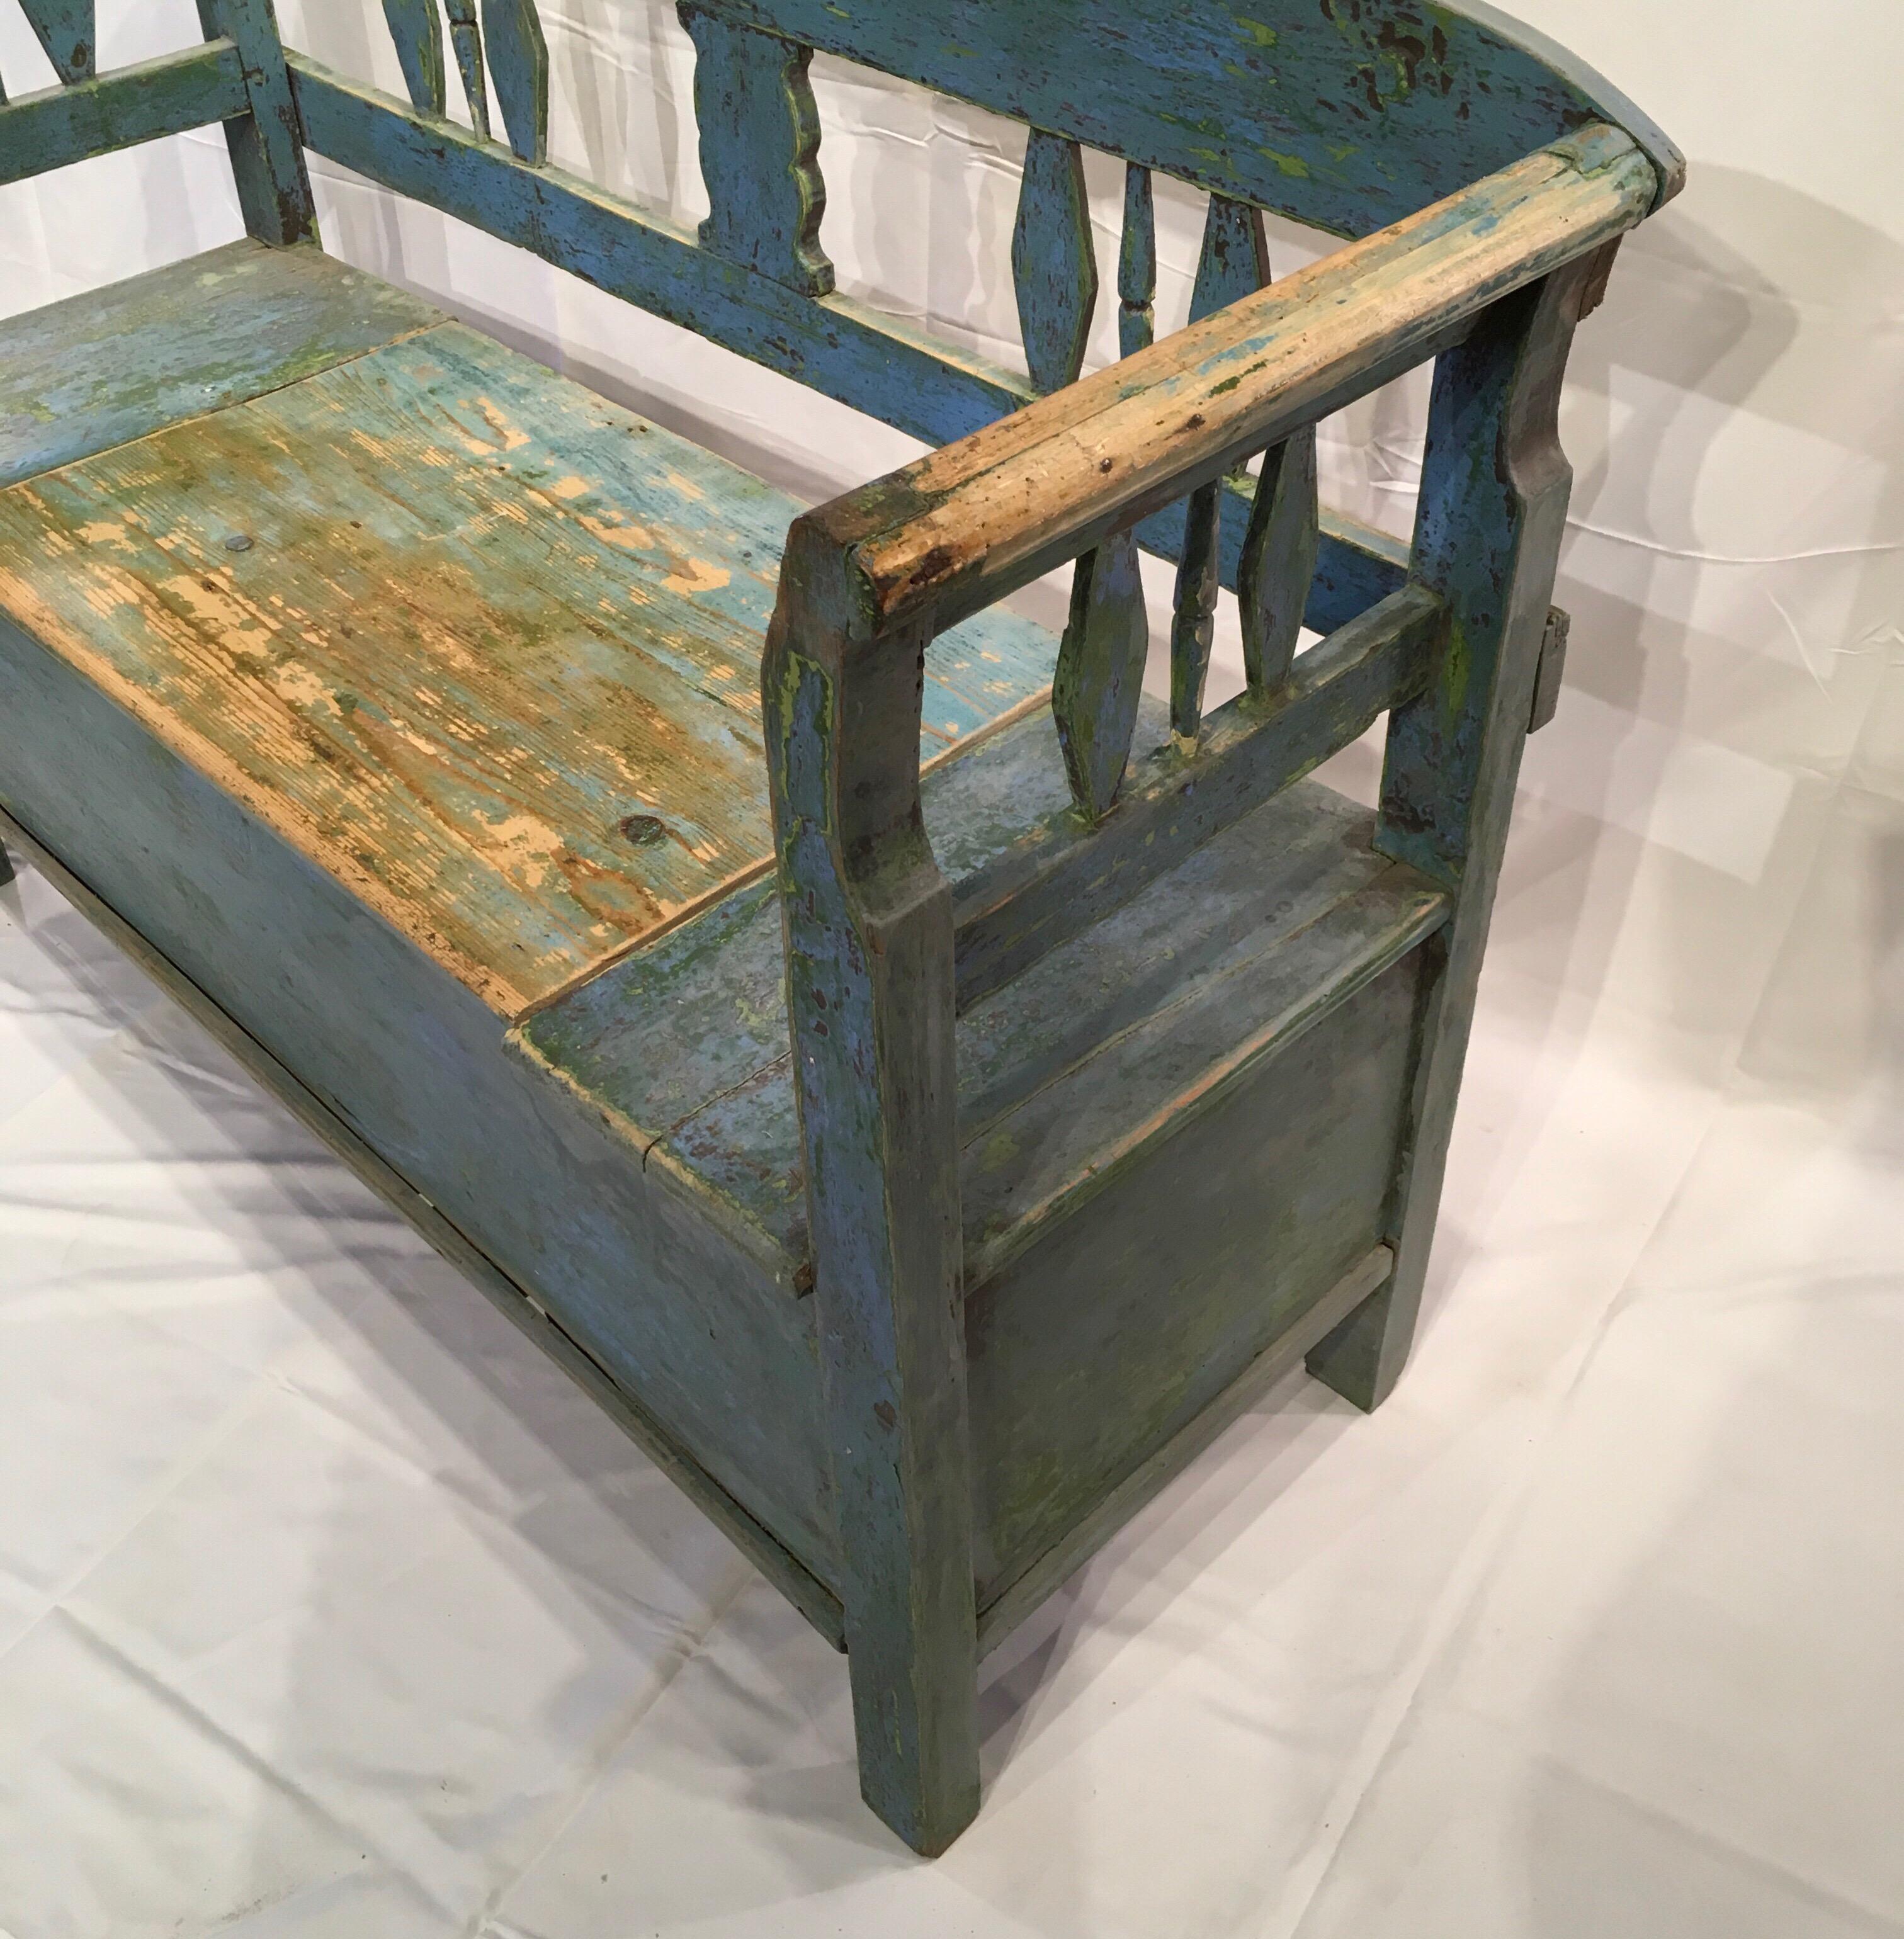 This is a lovely and useful painted bench with storage in the seat which makes this ideal for a hallway or mudroom. This Gustavian piece is finished in a beautiful aged painted patina which enhances the charm of this wonderful piece. The piece is